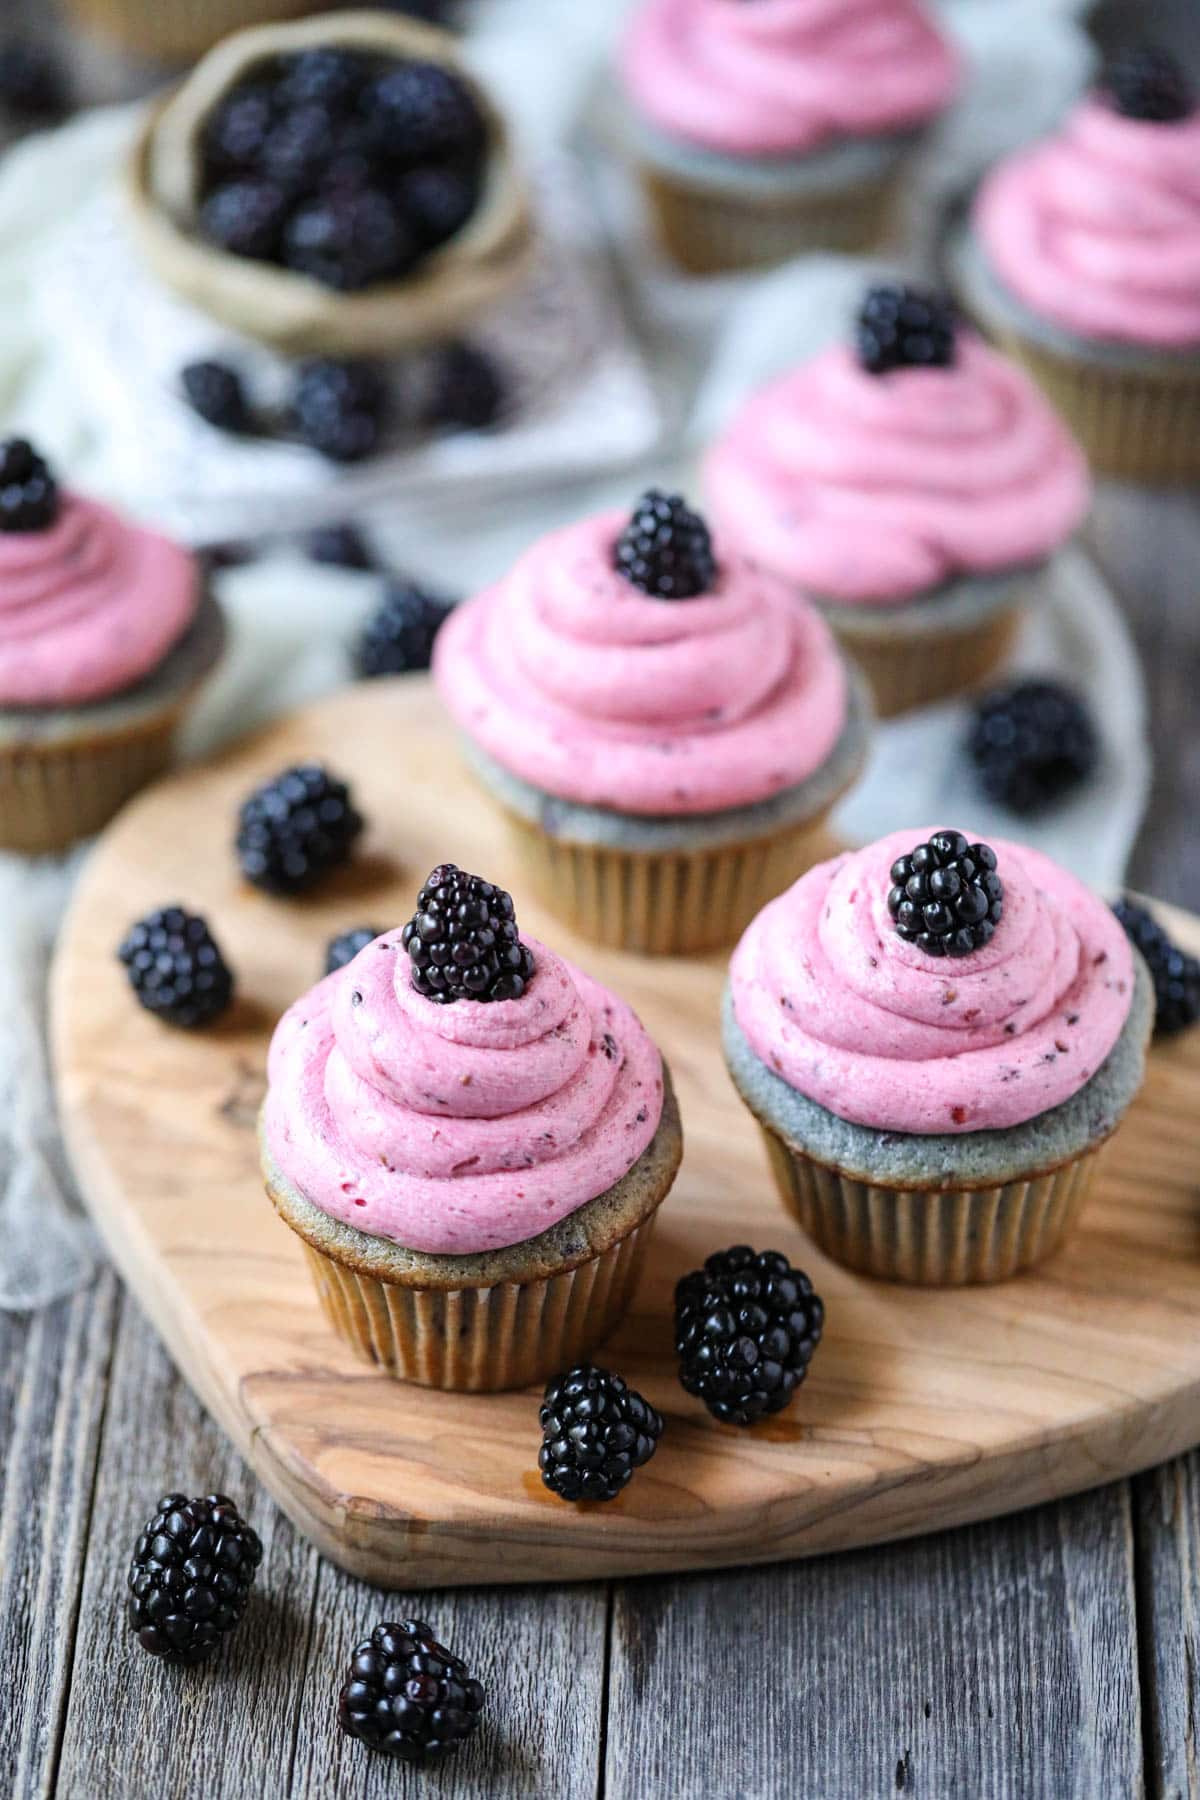 blackberry cupcakes on a wooden cutting board with blackberries and mint leaves scattered around.